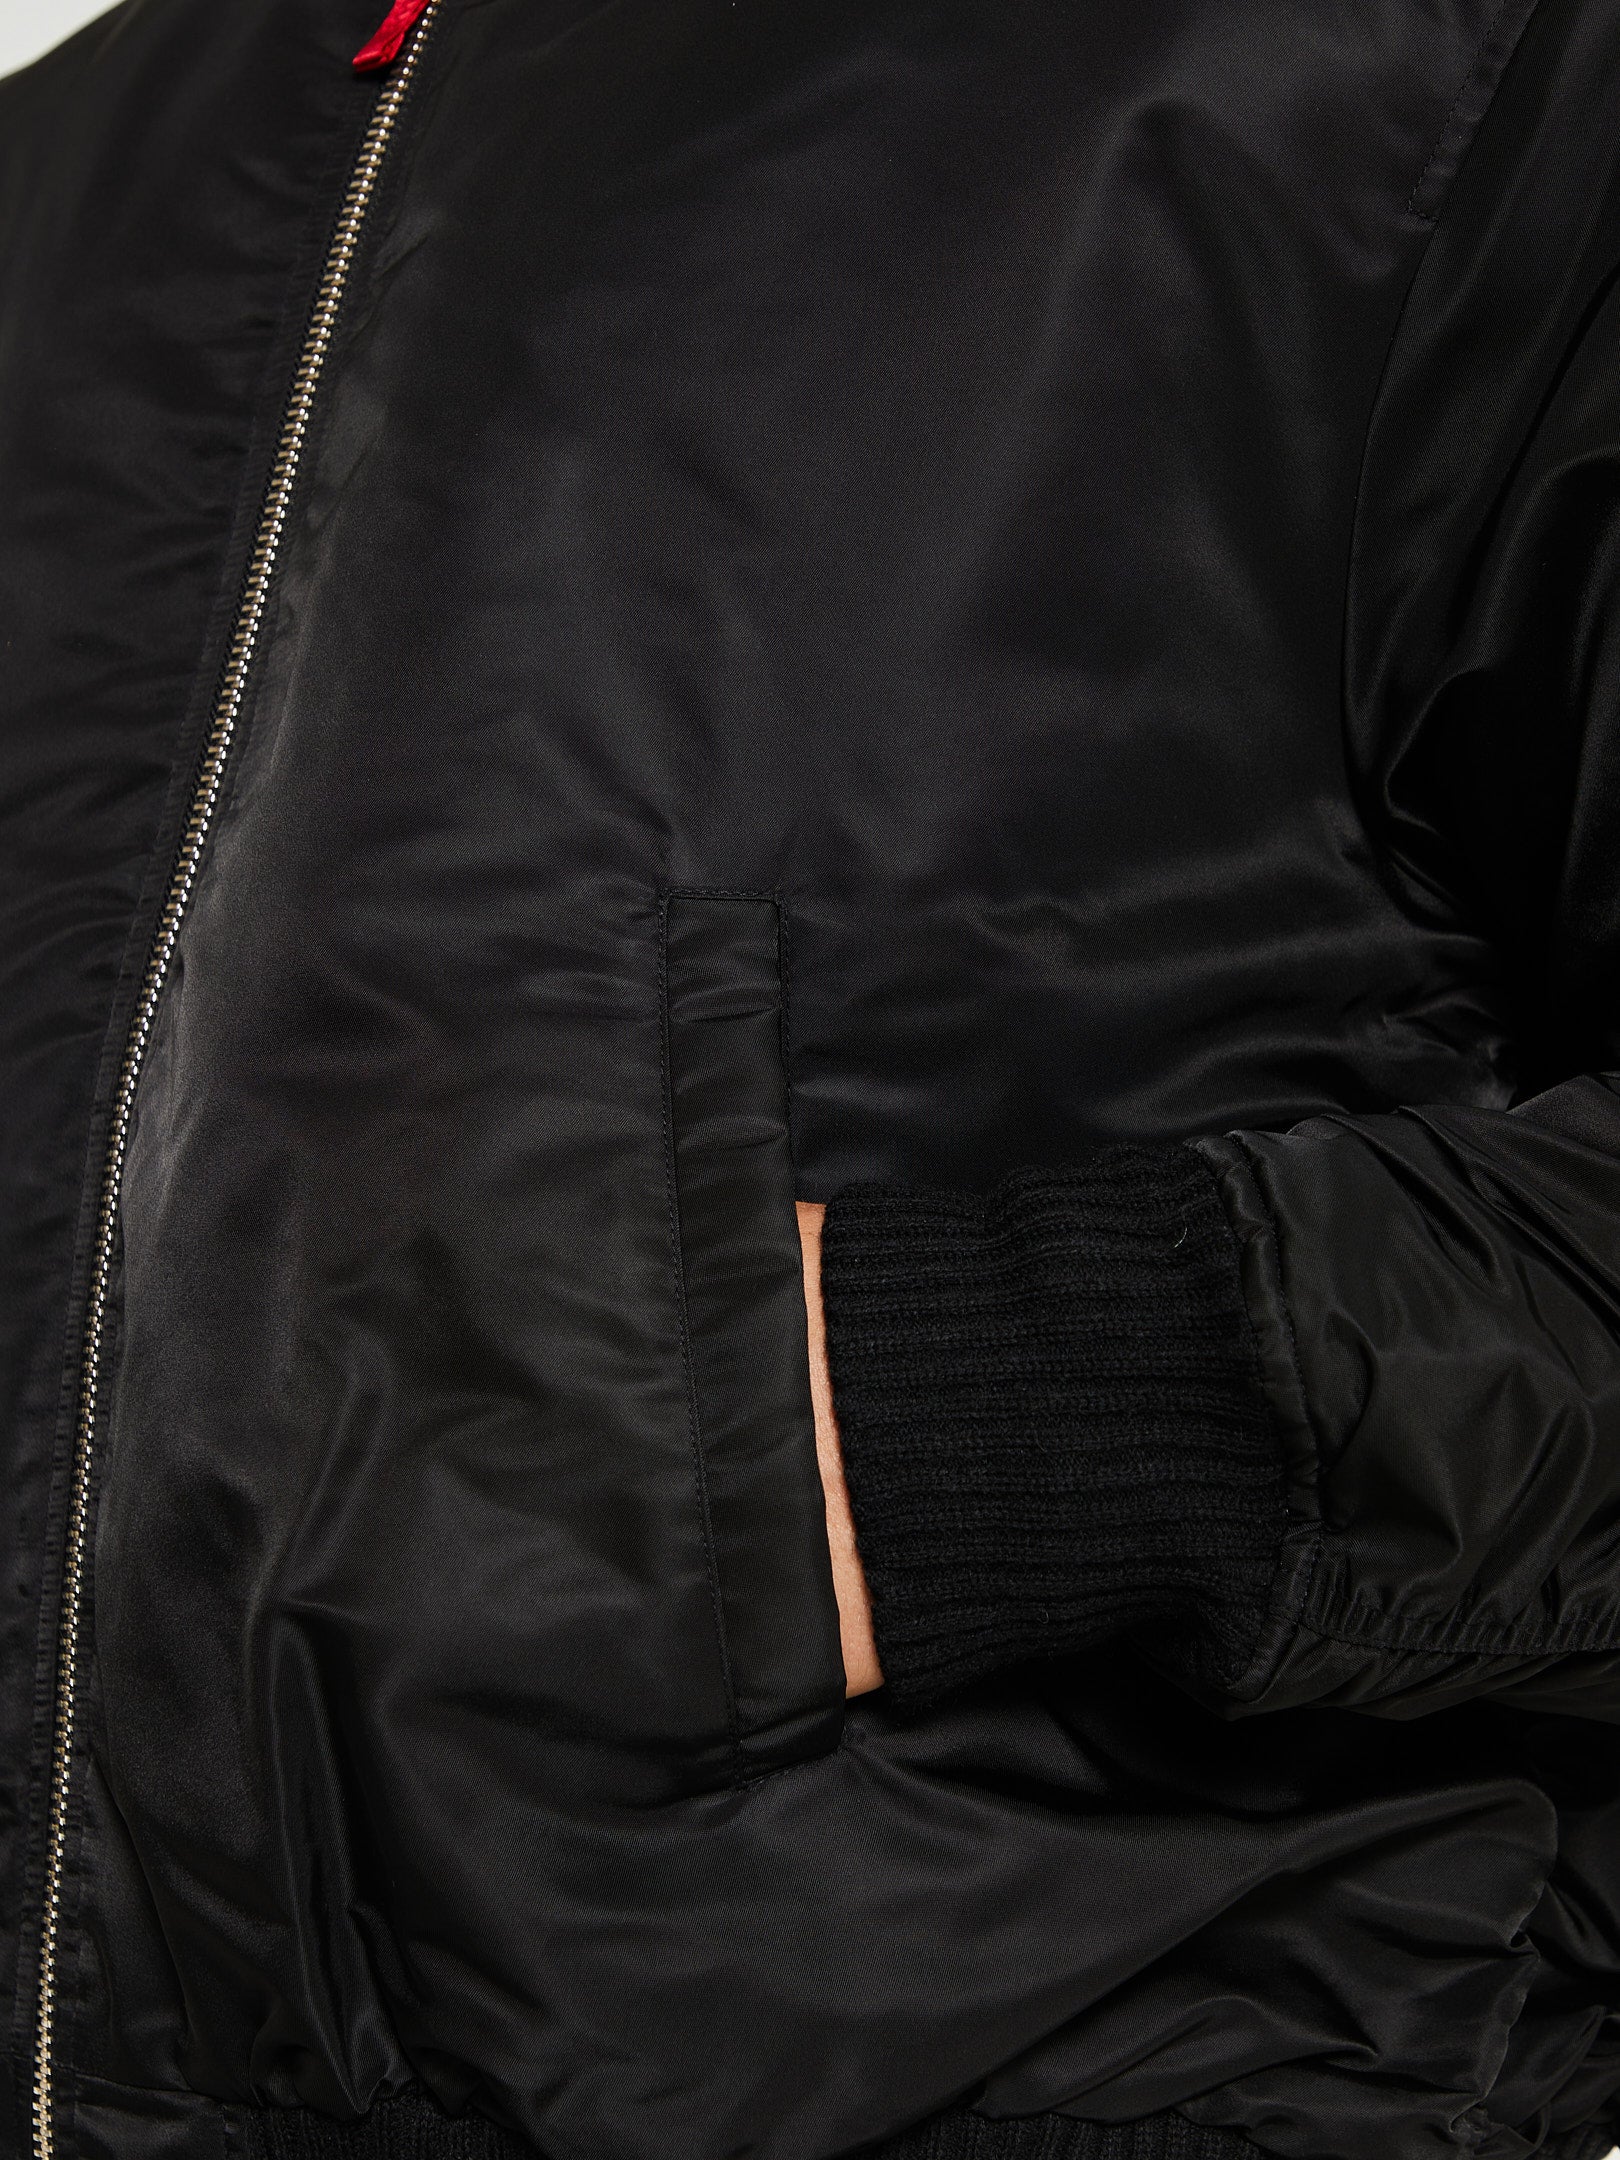 Stockholm (Surfboard) Club - Bomber Jacket in Black – stoy